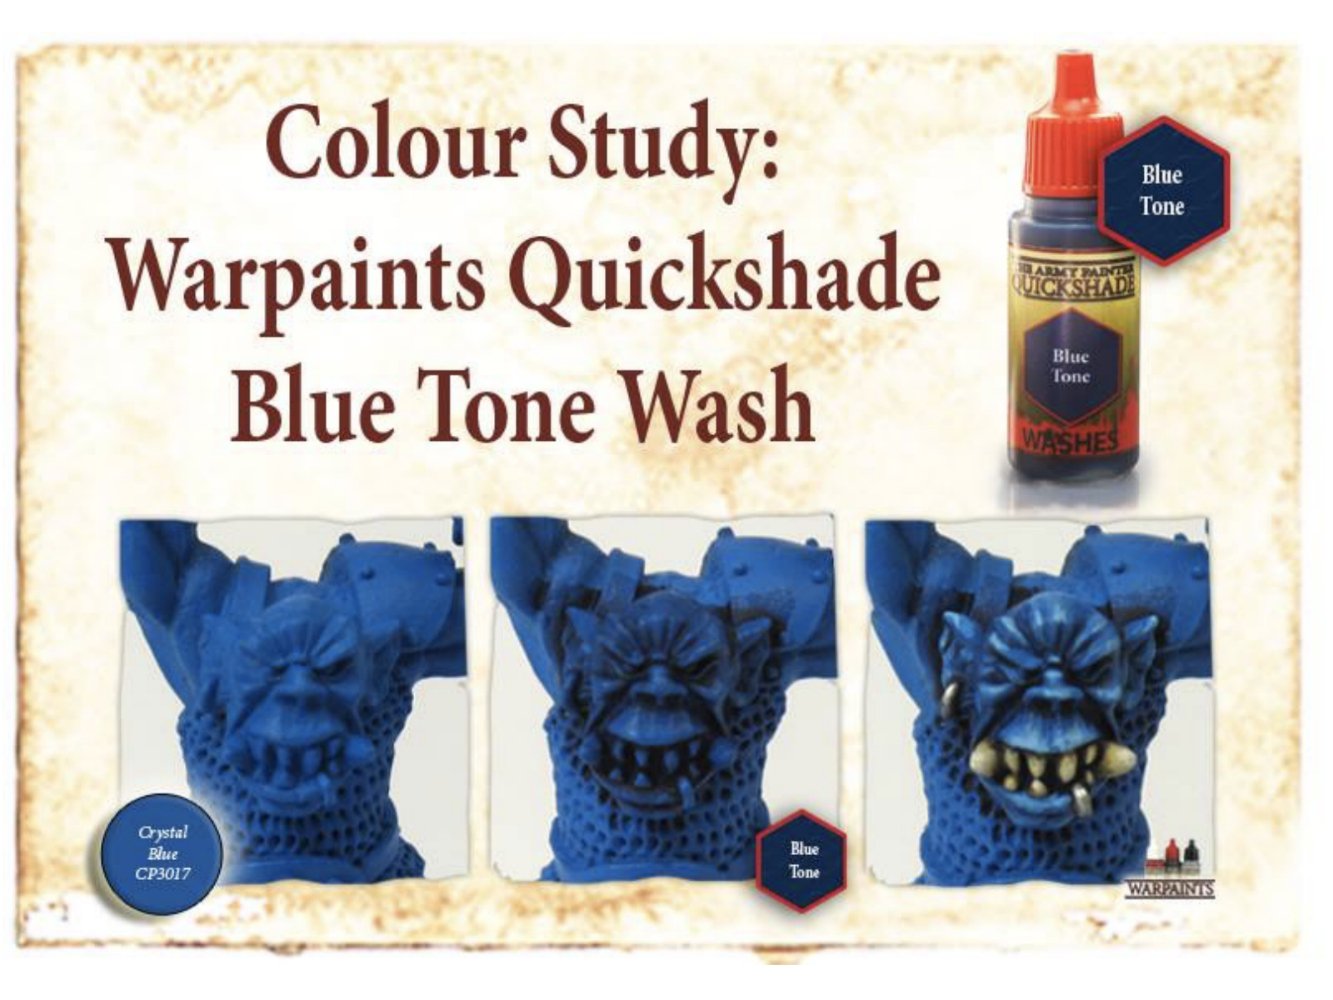 The Army Painter Quickshade Washes Set, 11 Miniature India